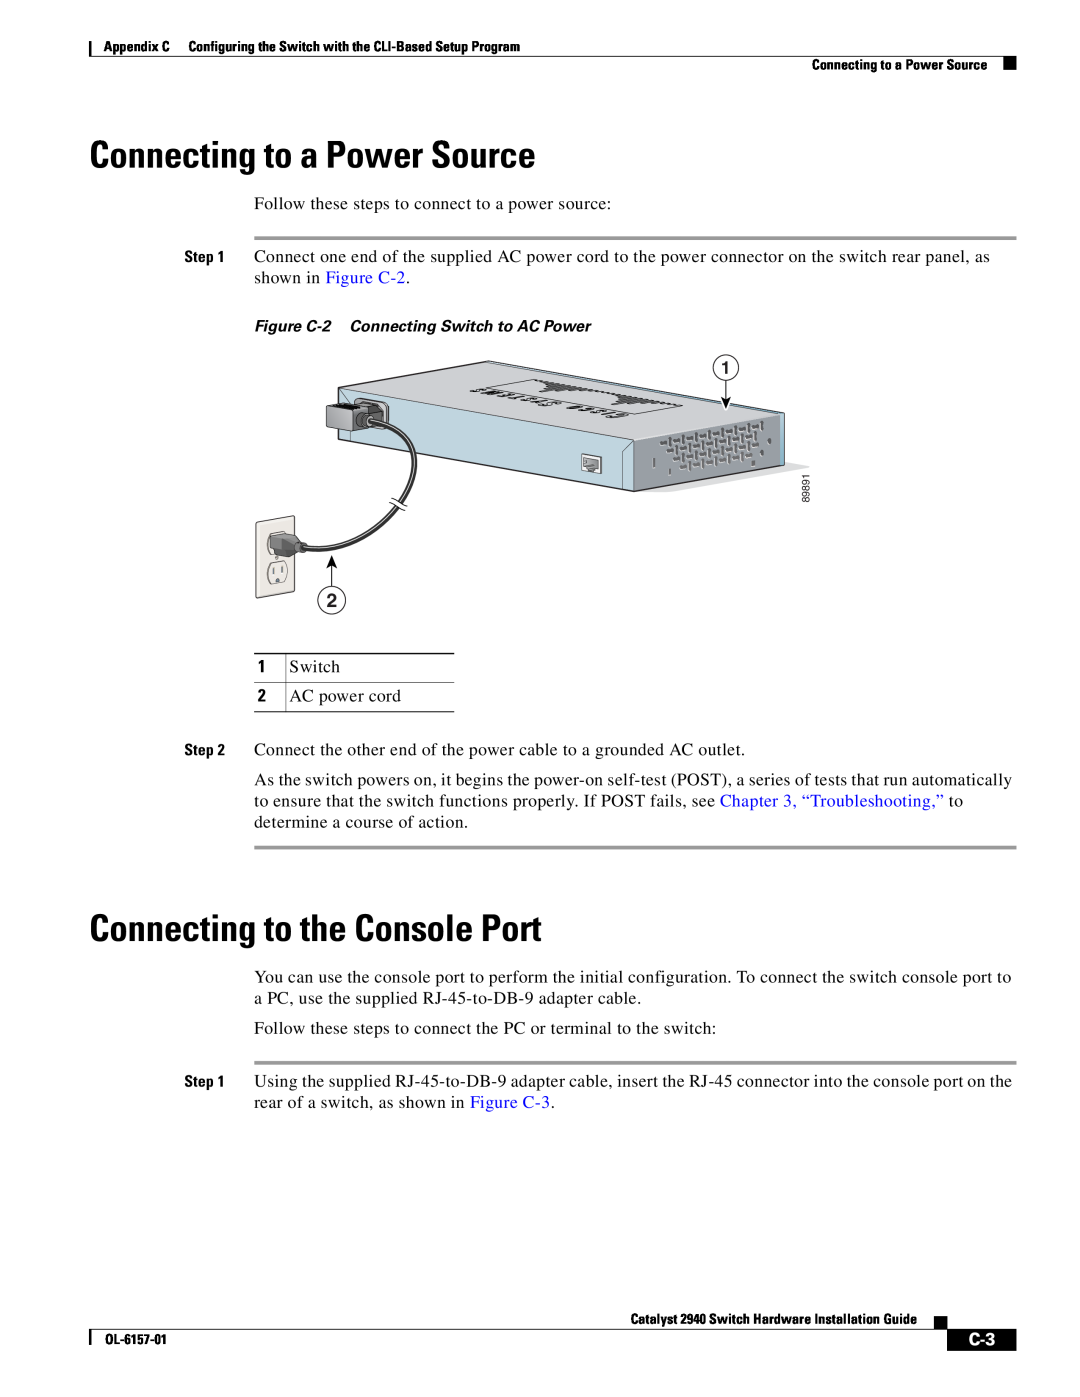 Cisco Systems OL-6157-01 manual Connecting to a Power Source, Connecting to the Console Port 